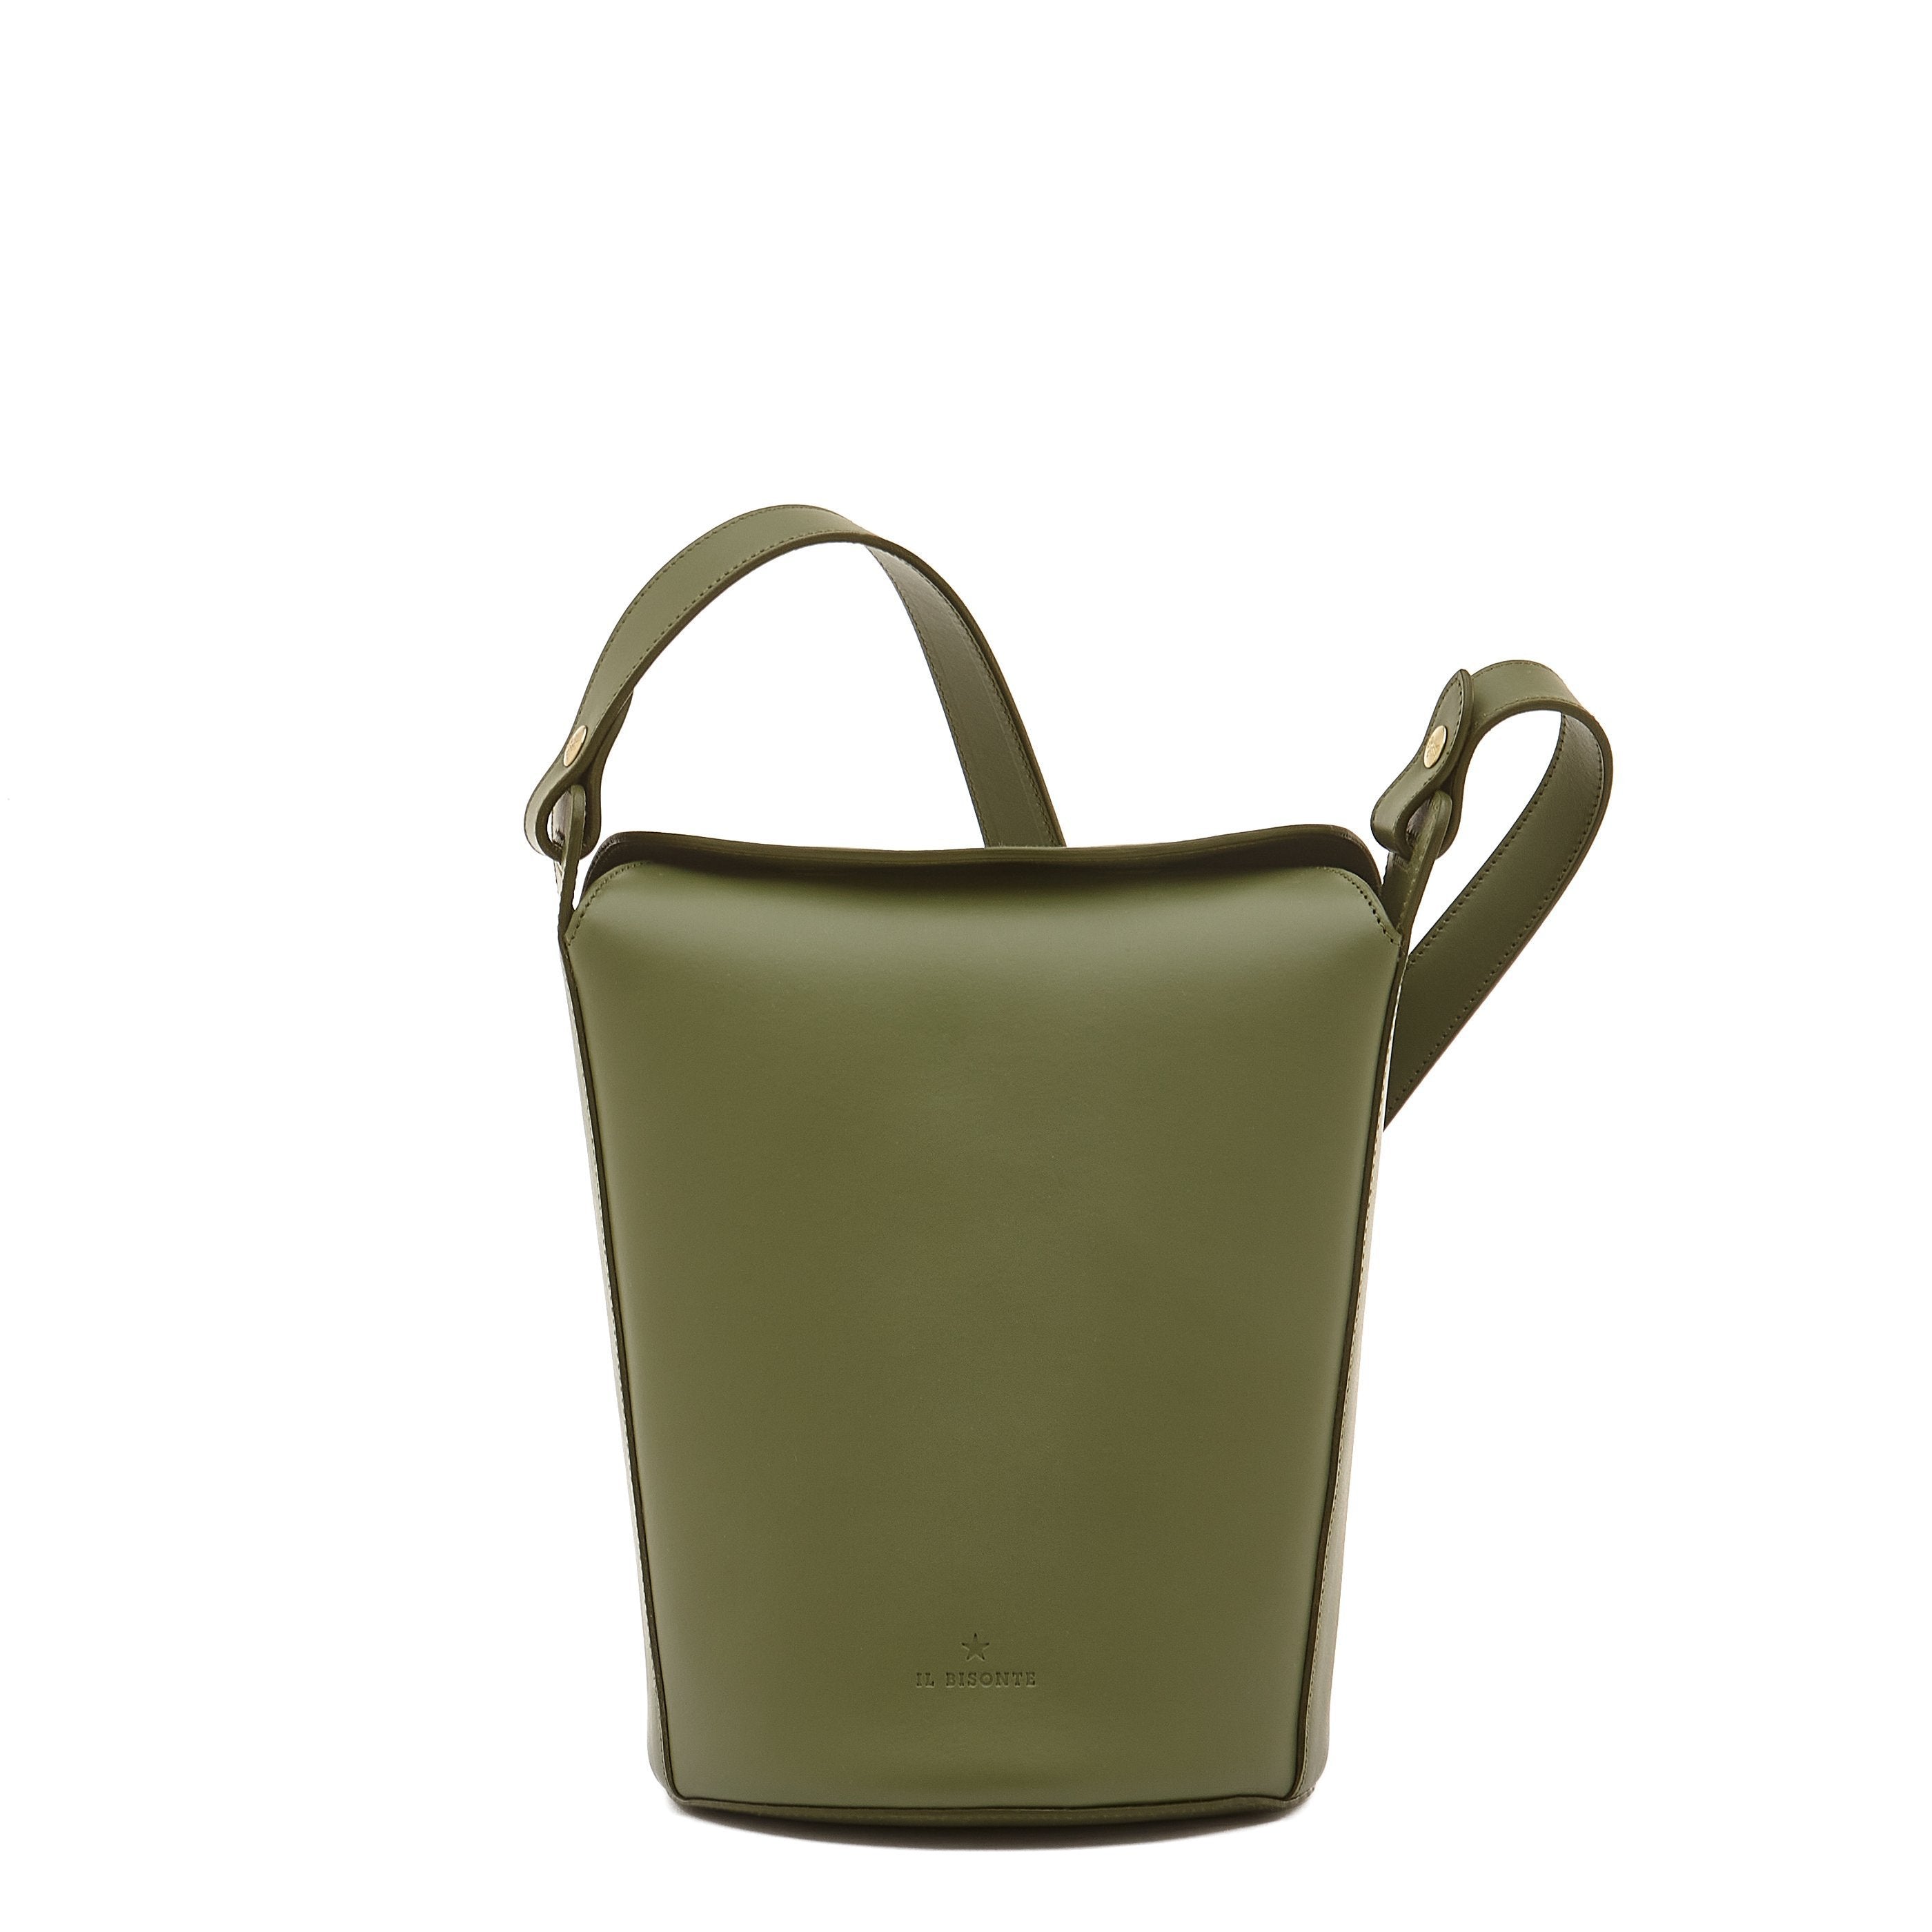 Maggio | Women's bucket bag in leather color cypress